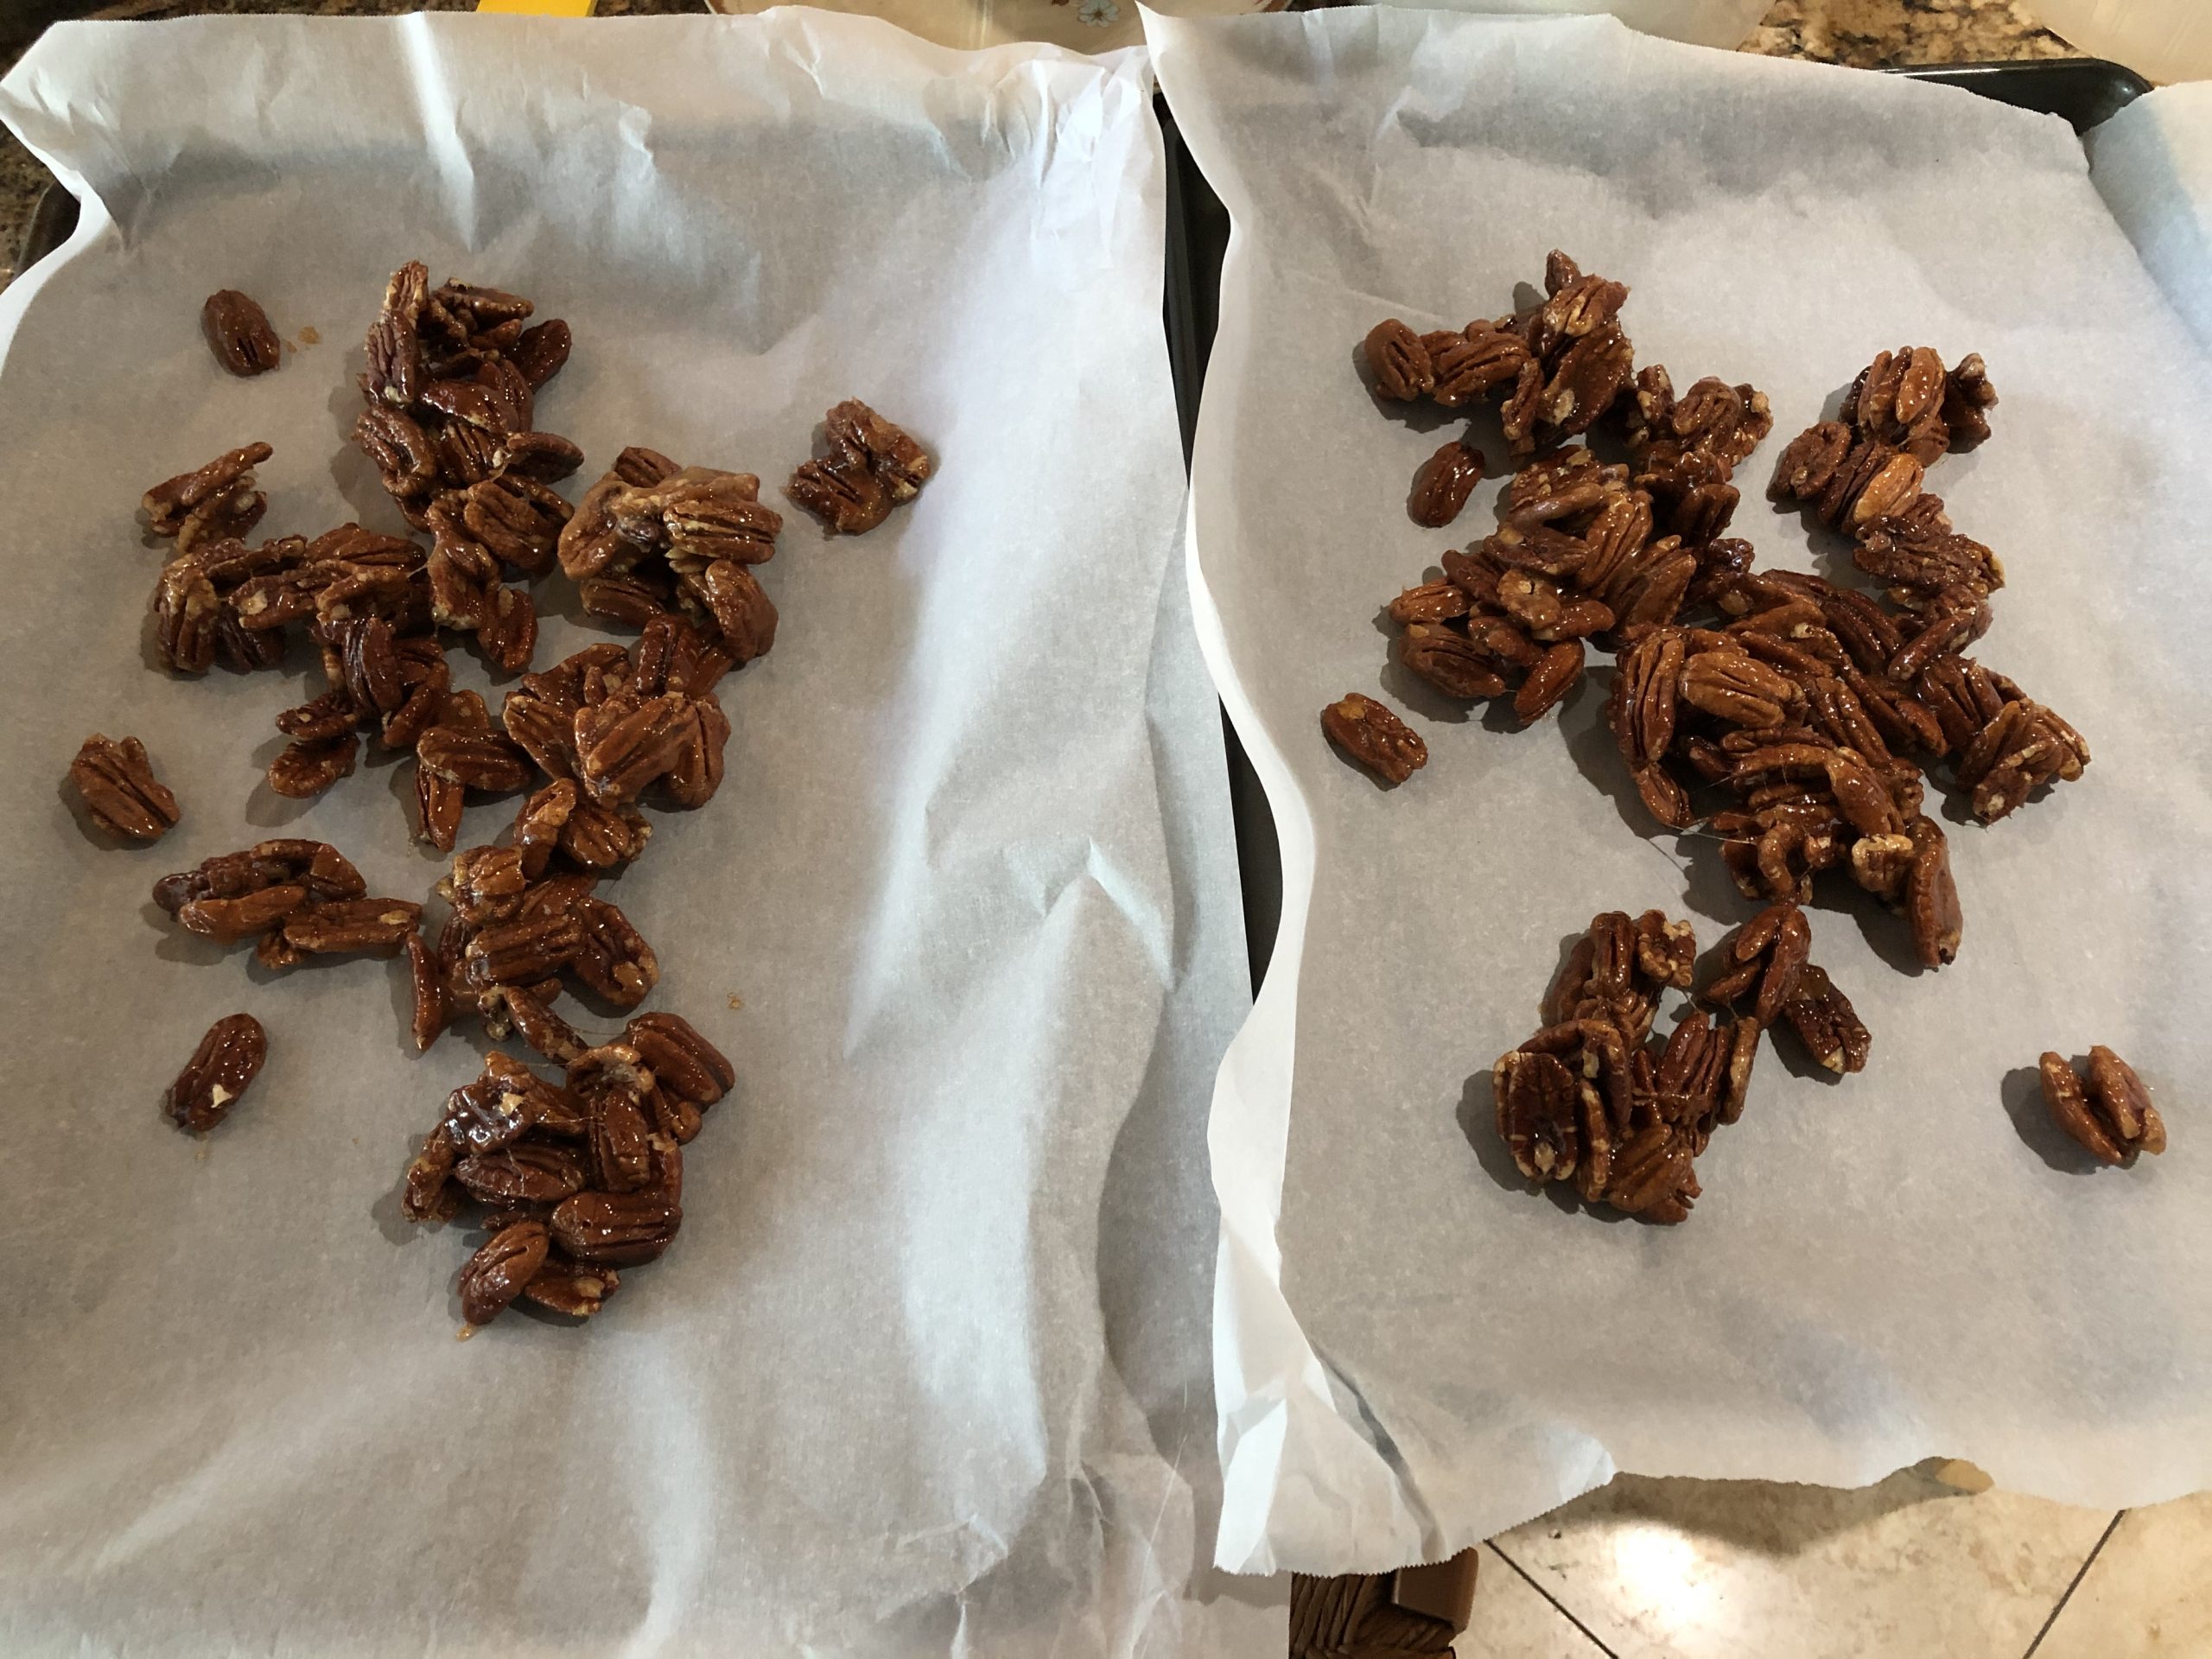 Divide pecans onto 2 baking trays